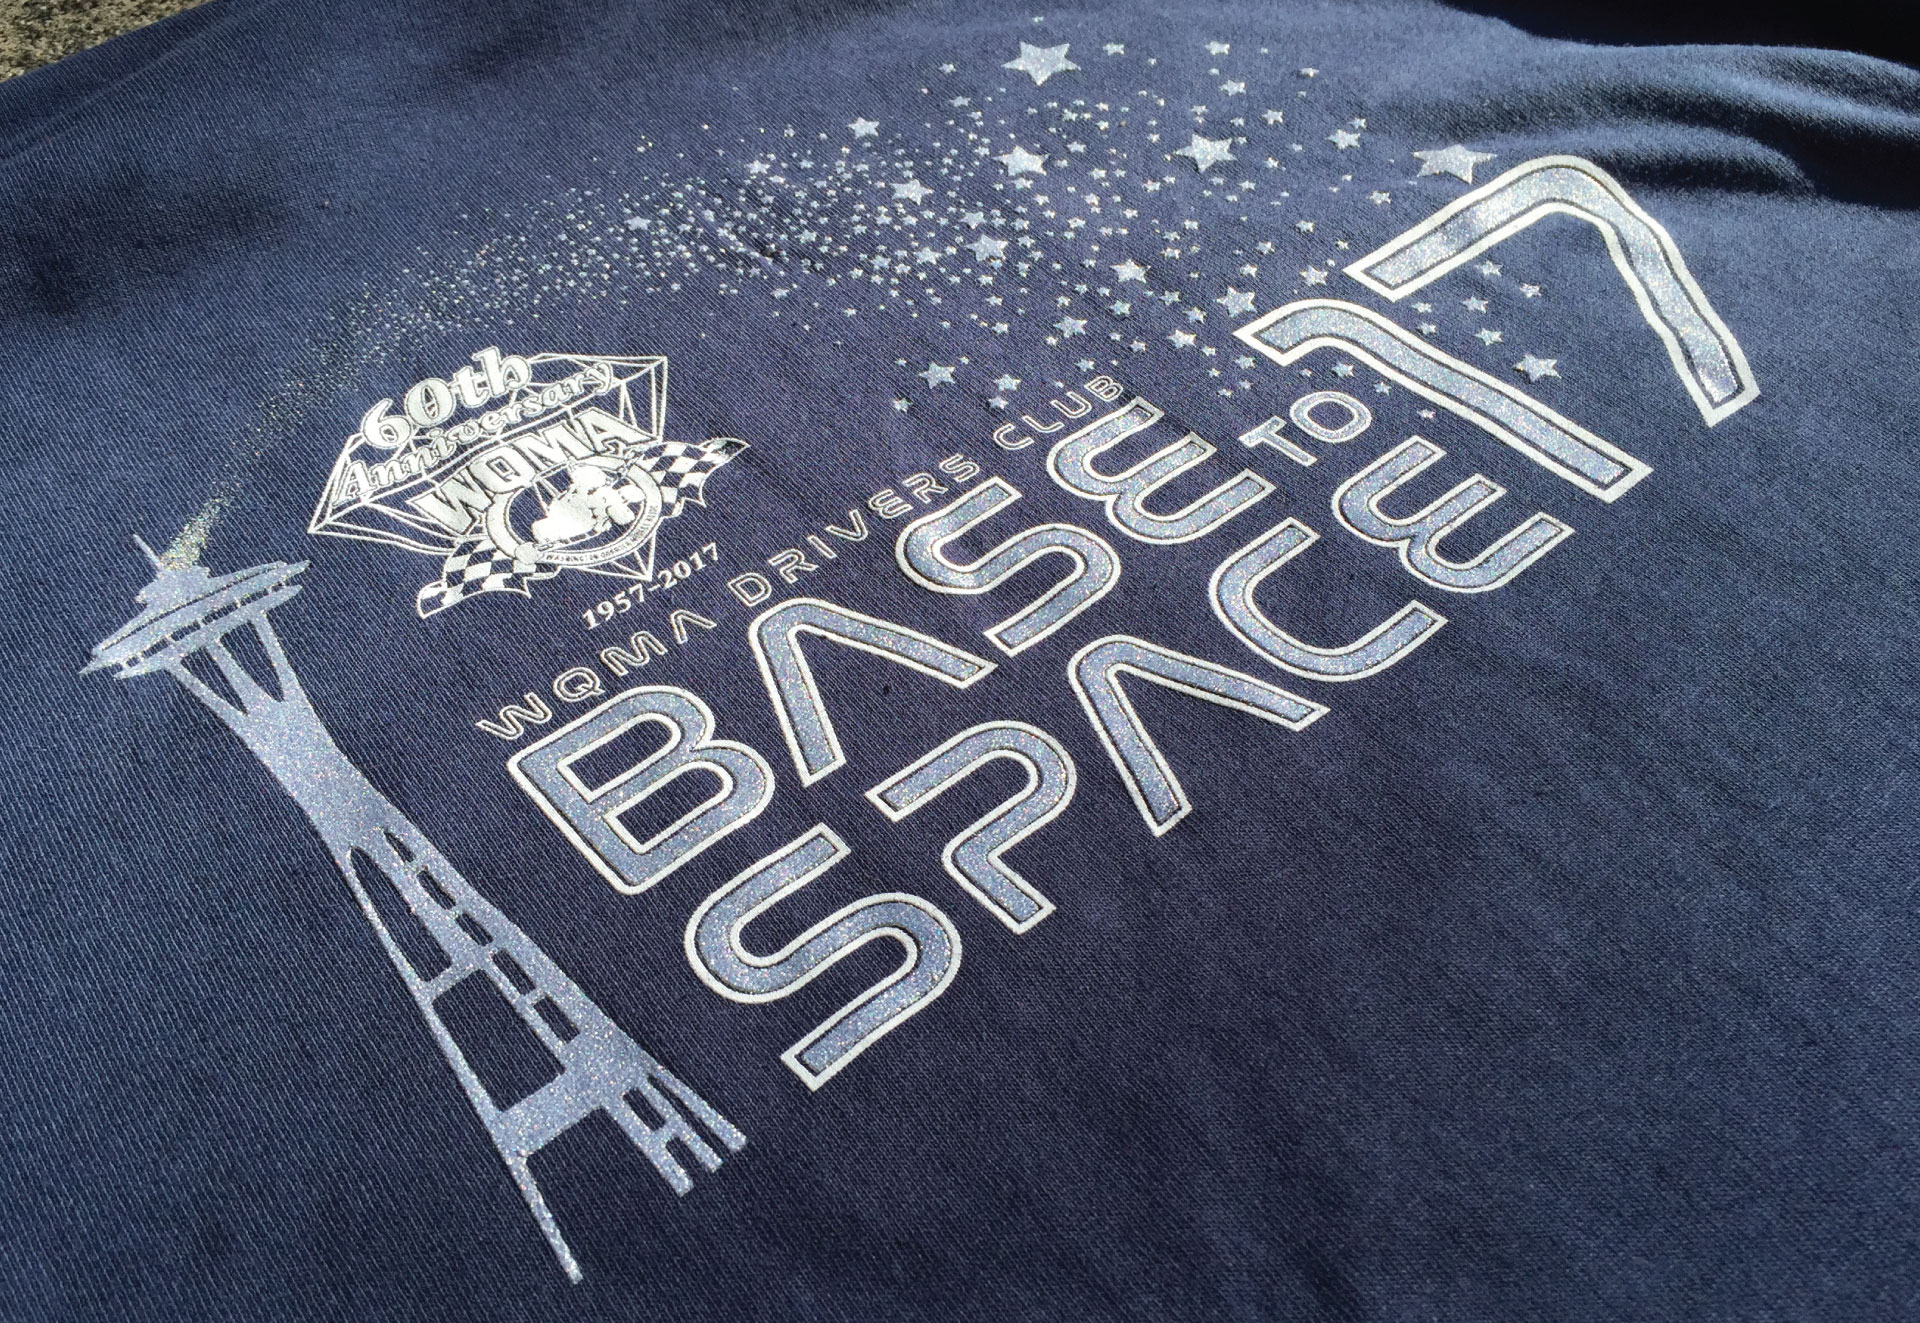 WQMA Base To Space T-Shirt designed and printed by Ontra Marketing Group